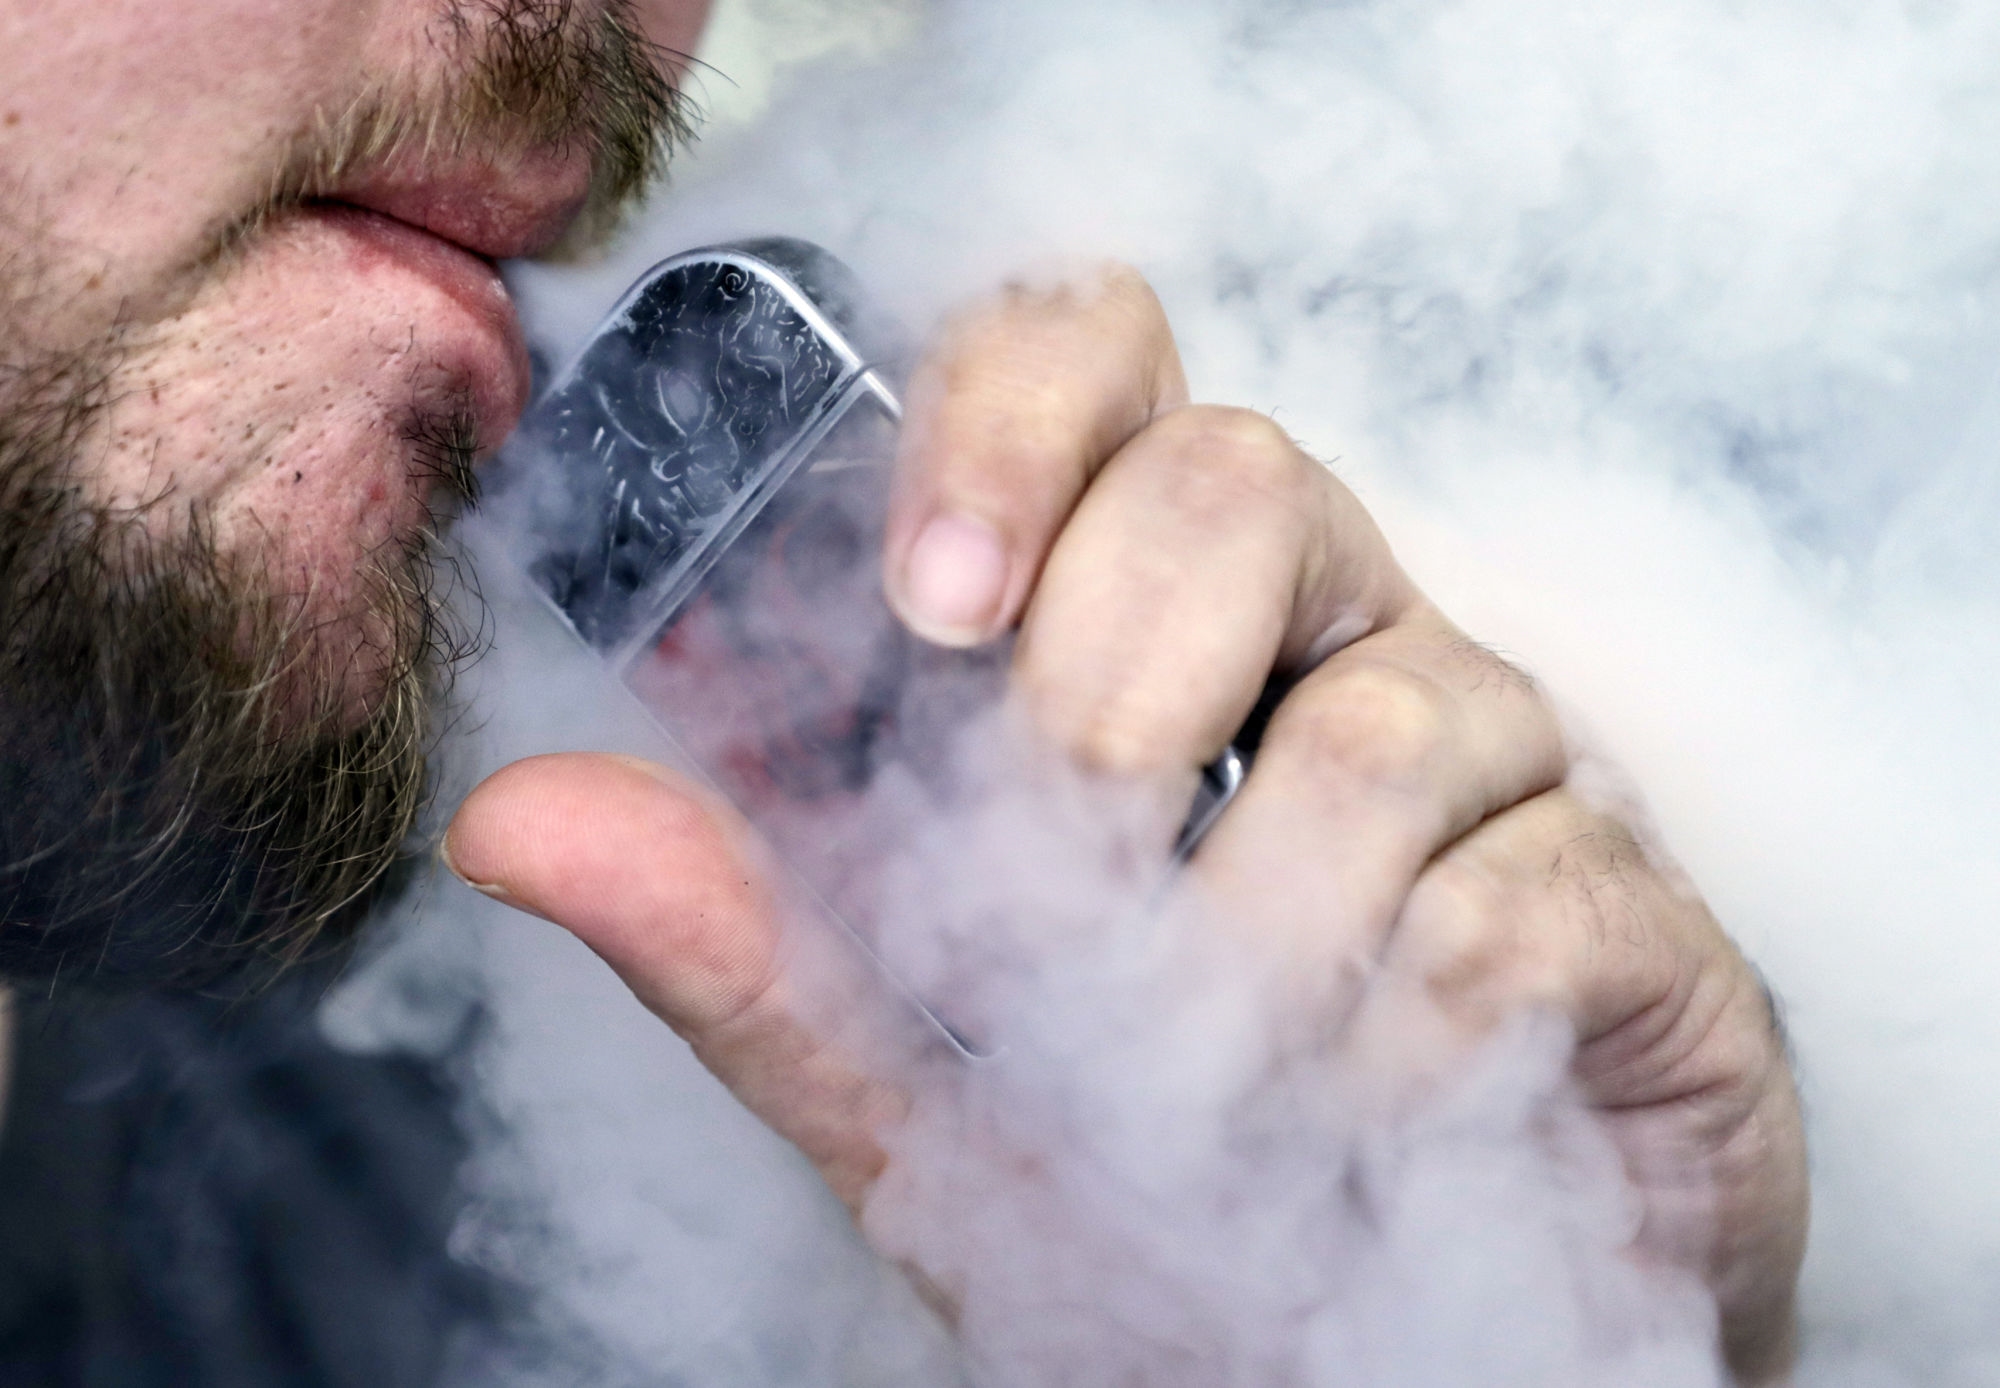 Study suggests vapers are 1.3 times more likely to develop lung disease | DeviceDaily.com